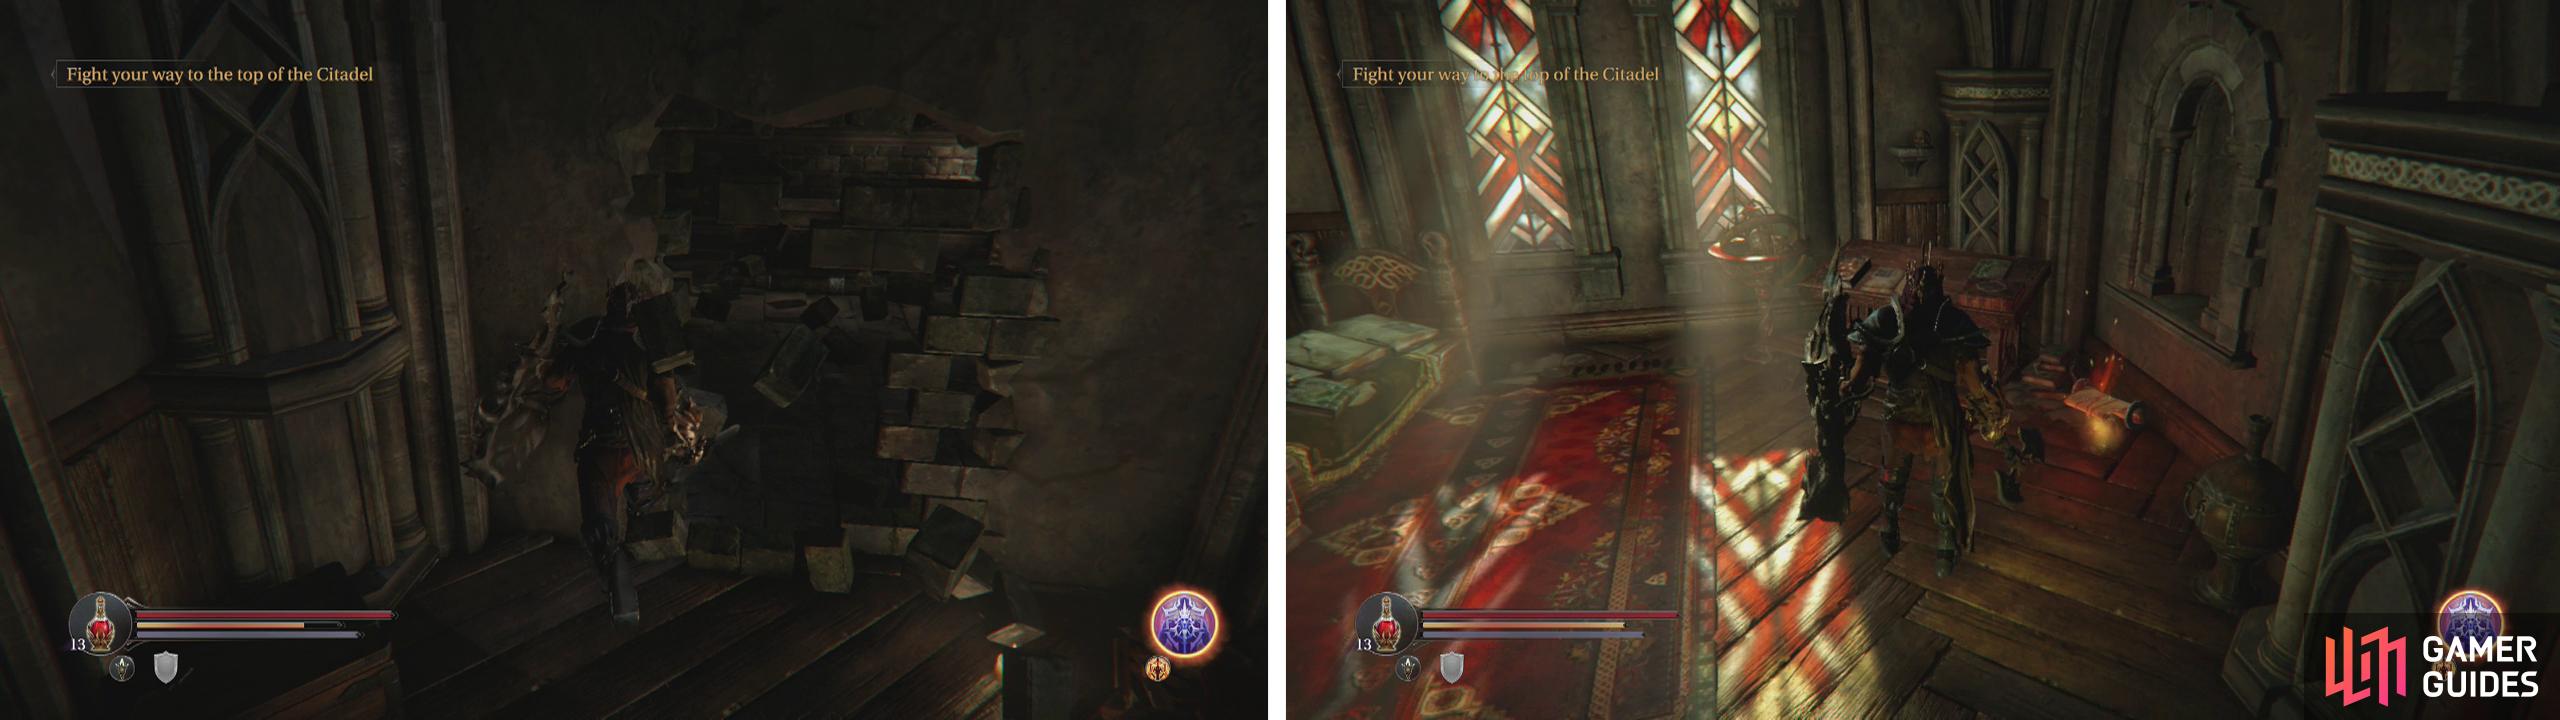 Look in the right hand room for a breakable wall containing a chest (left) and in the left you'll find an Audio Note (right).